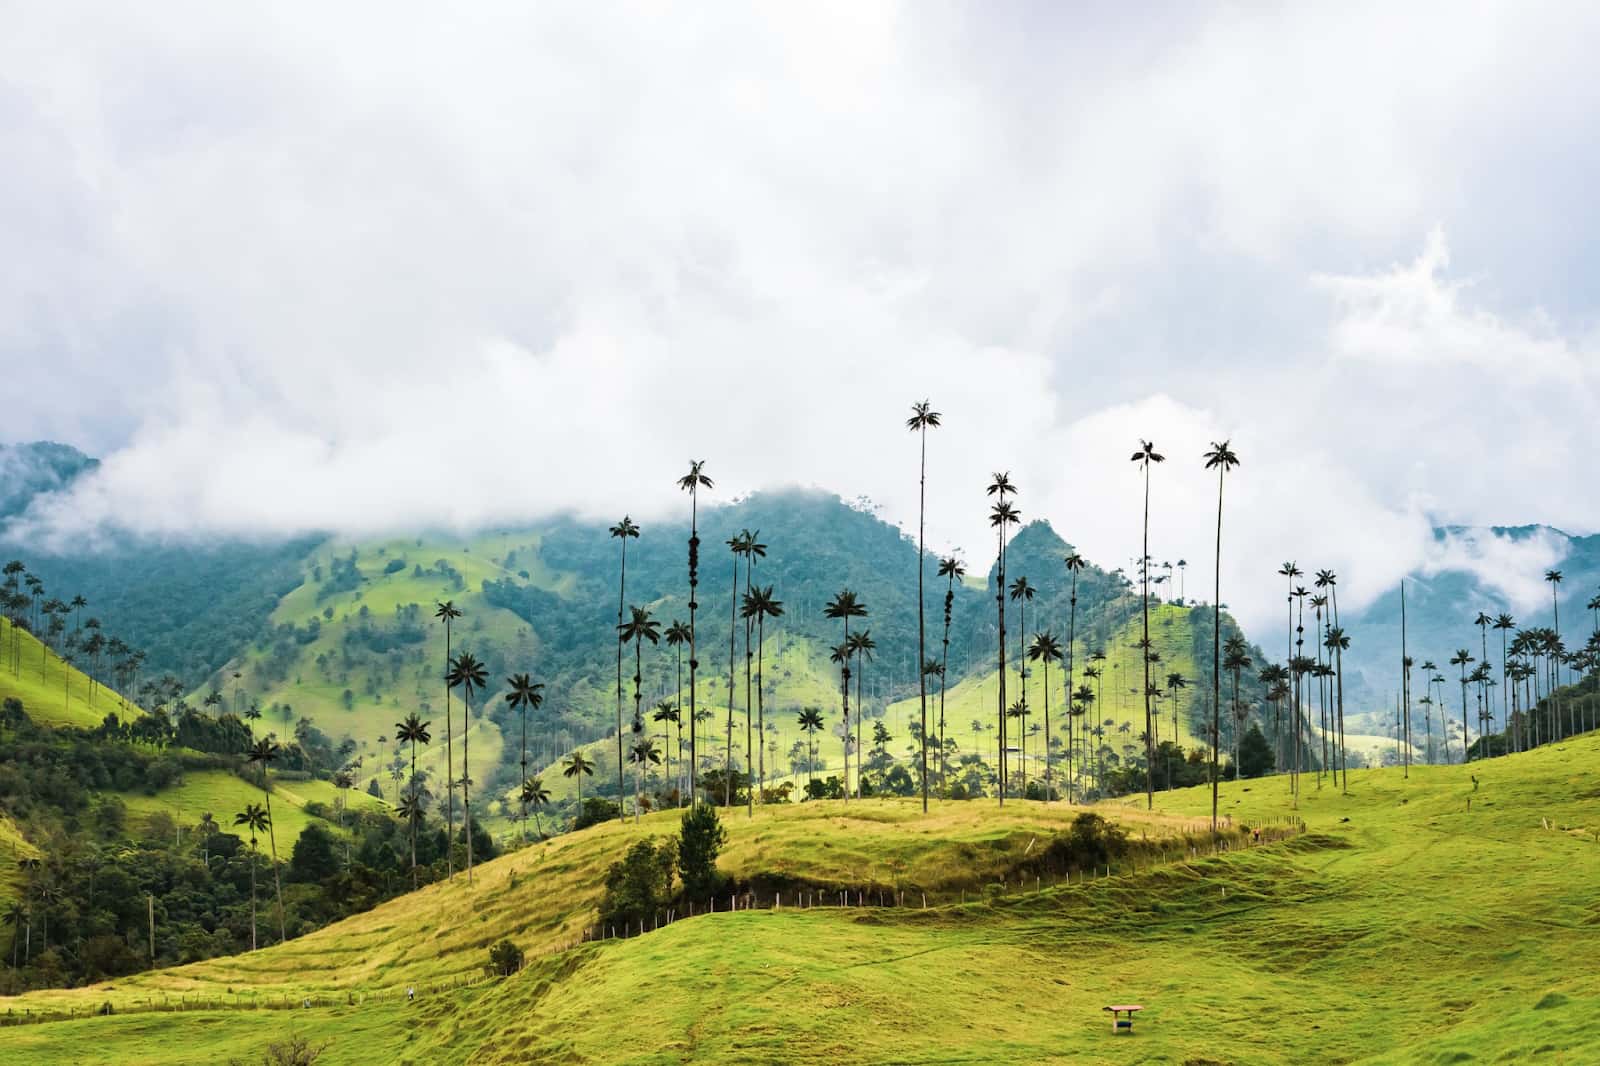 Colombia landscape - tall wax palm trees and green hills